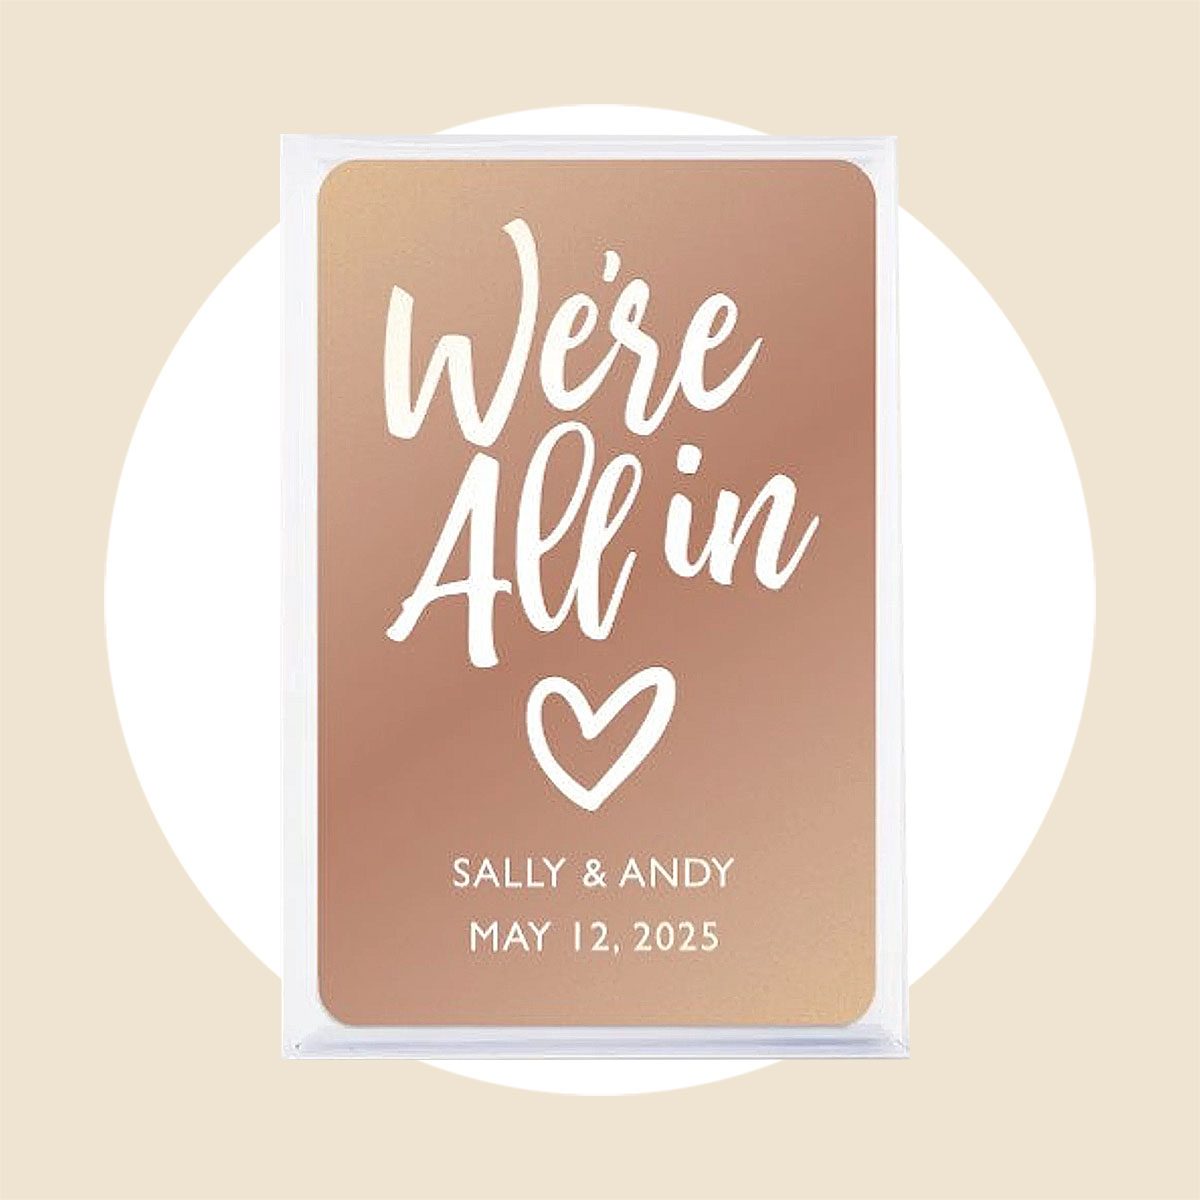 A Sweet Thank You Wedding Round Stickers with names and date